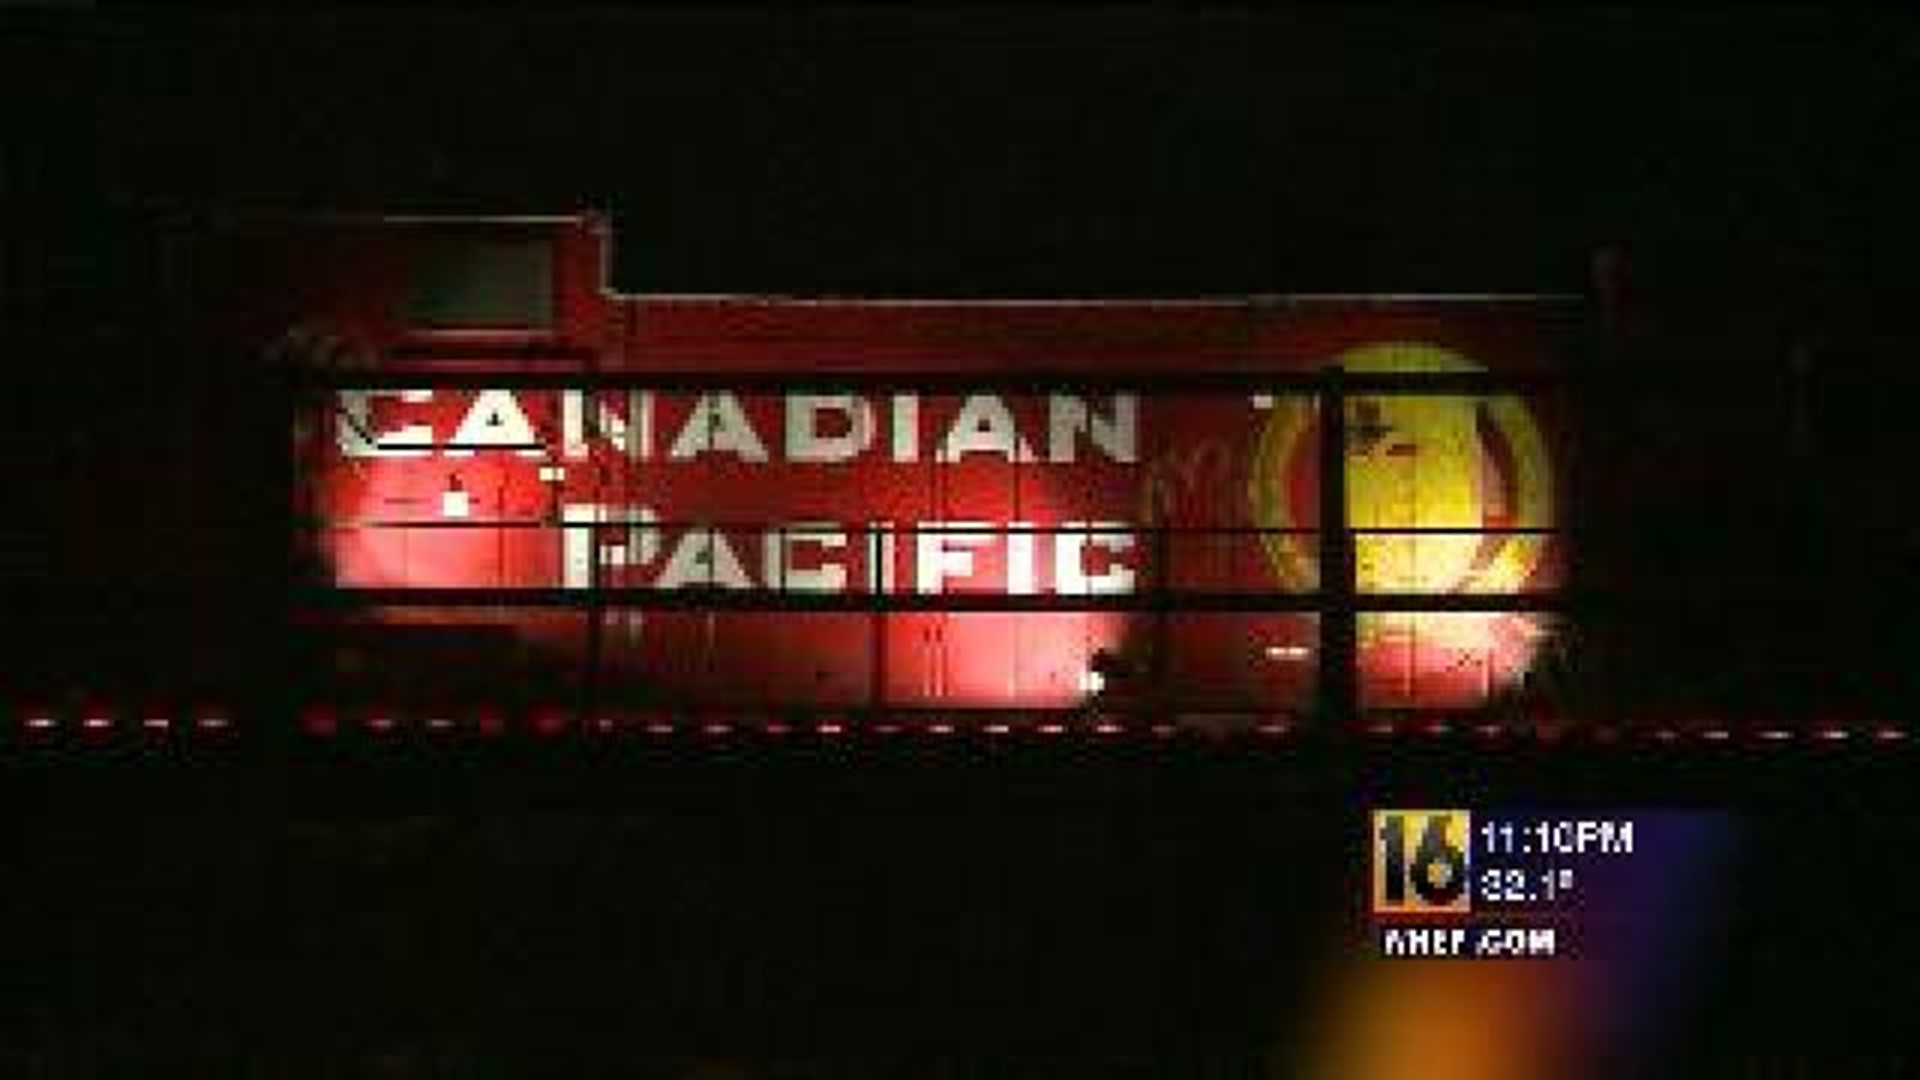 Holiday Train Visits Electric City Once Again